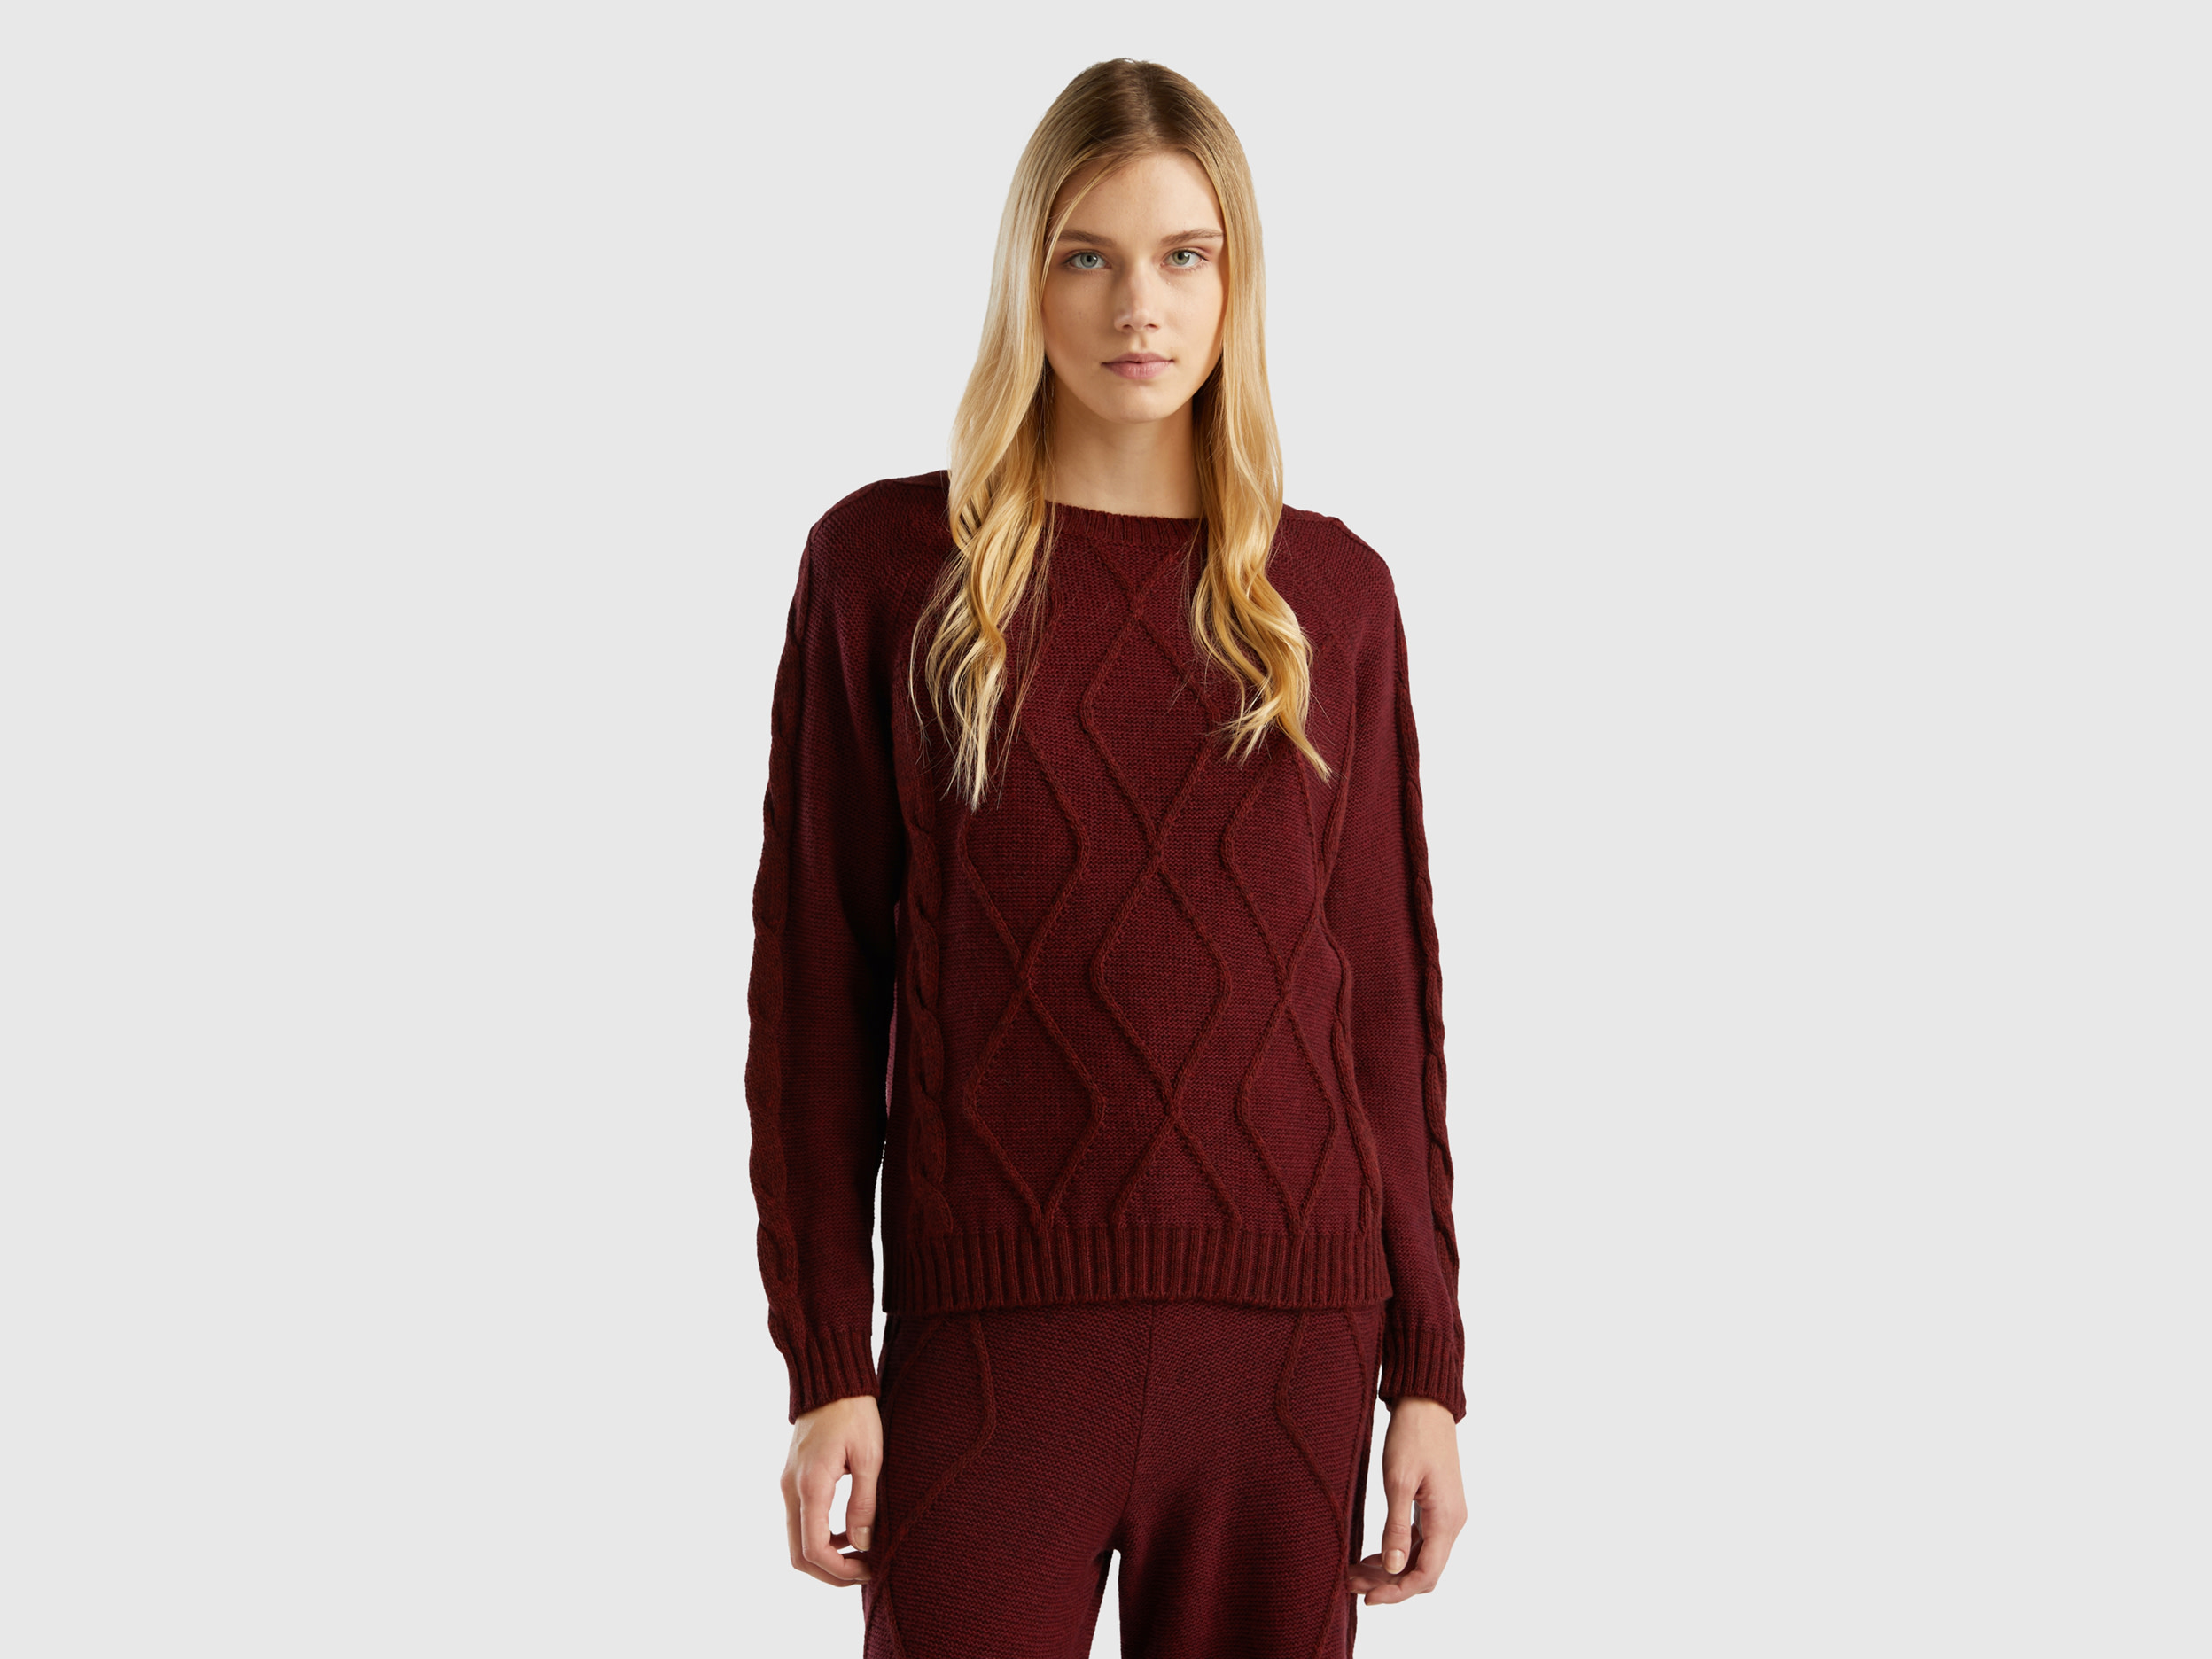 Benetton, Sweater With Cables And Diamonds, size XS, Burgundy, Women